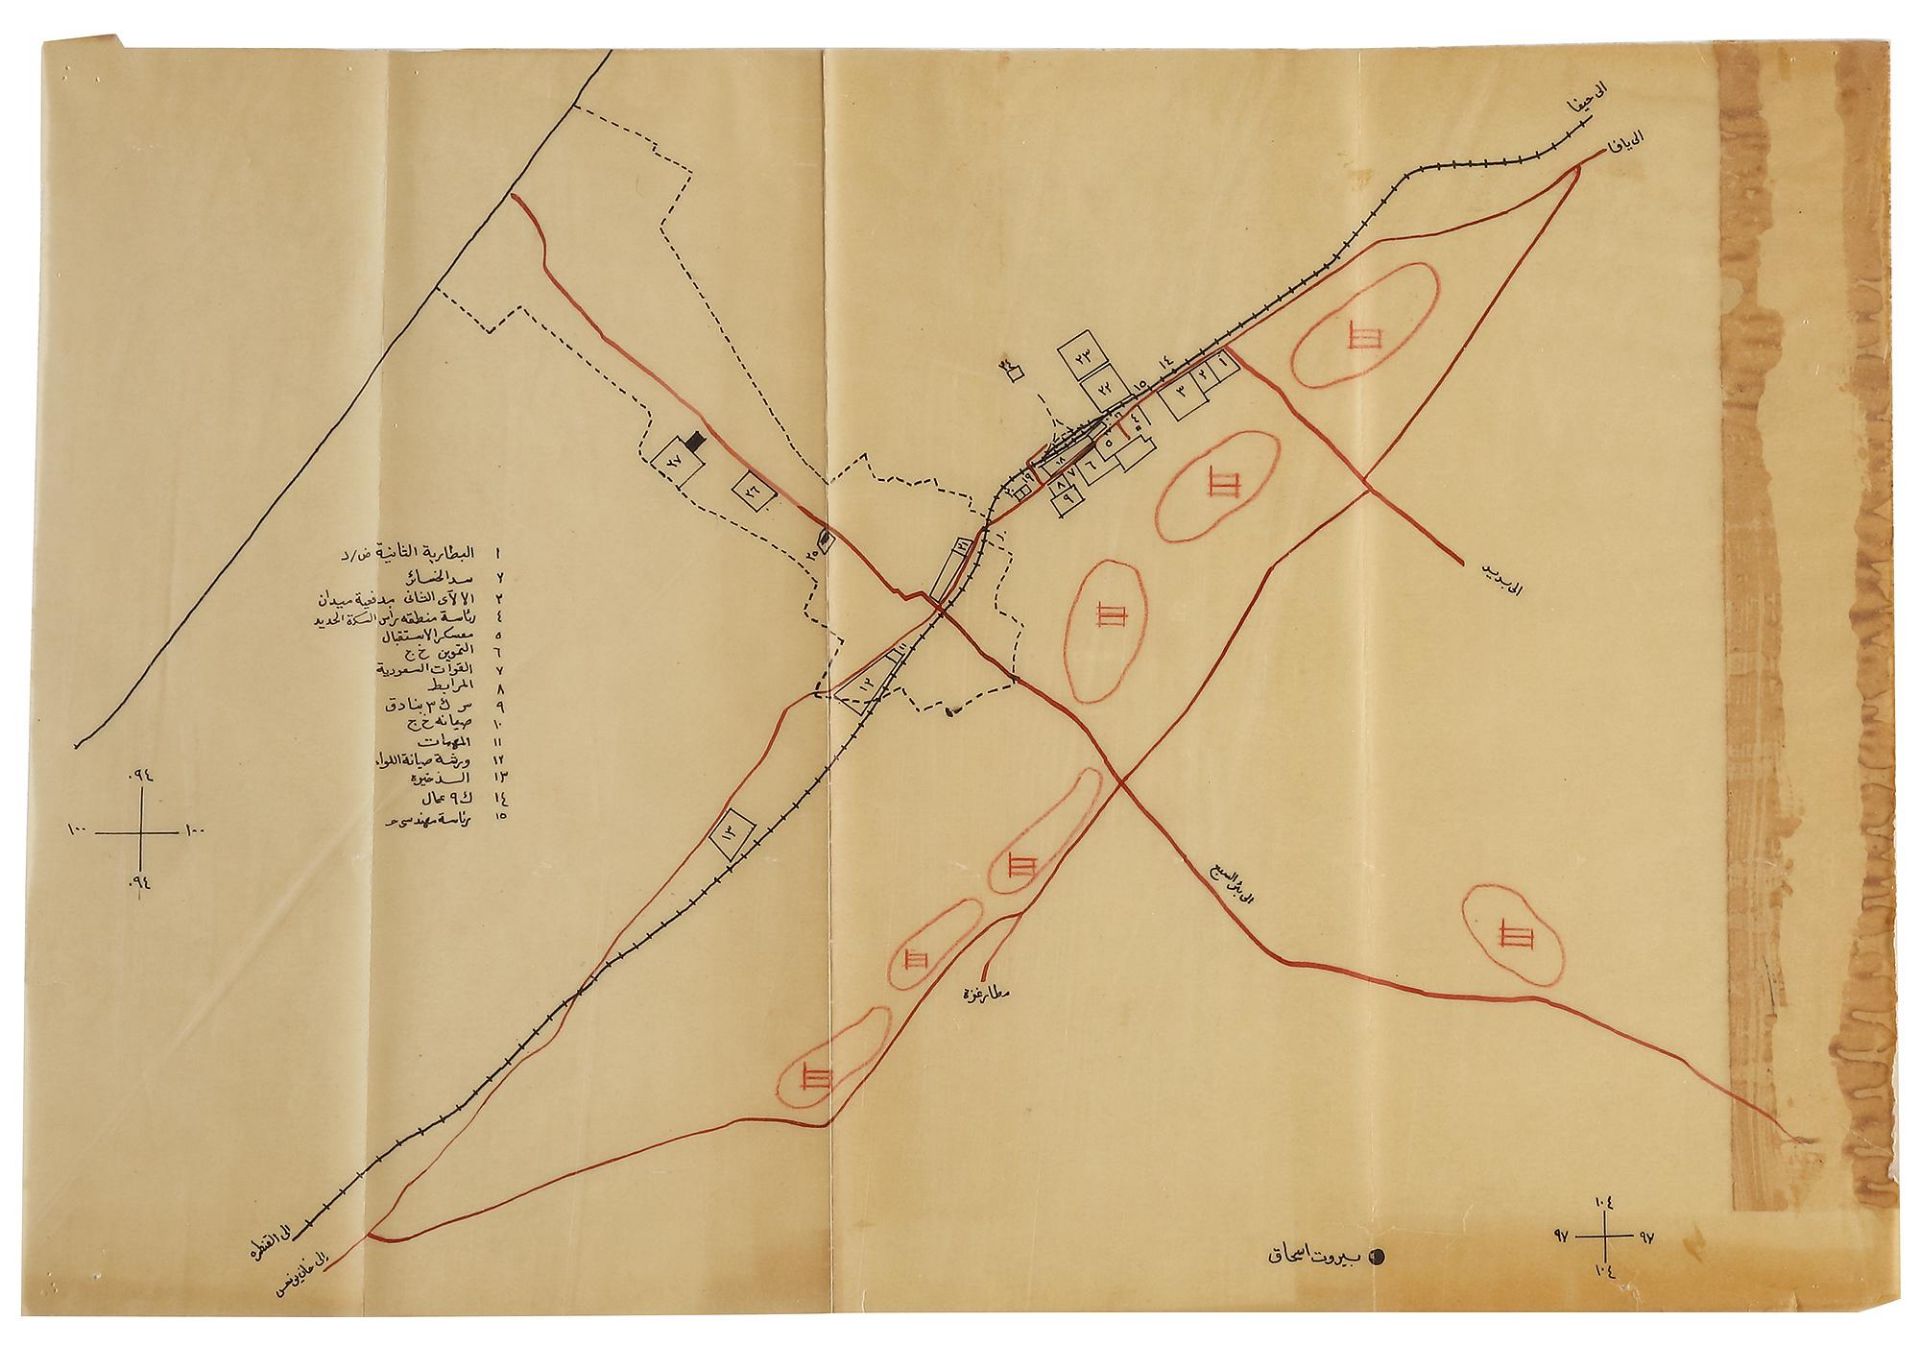 MIITARY MAPS AND DOCUMENTS SHOWING THE TOWNS/VILLAGES IN ASHDOD AND GAZA IN PALESTINE, PRINTED 5TH O - Image 2 of 6